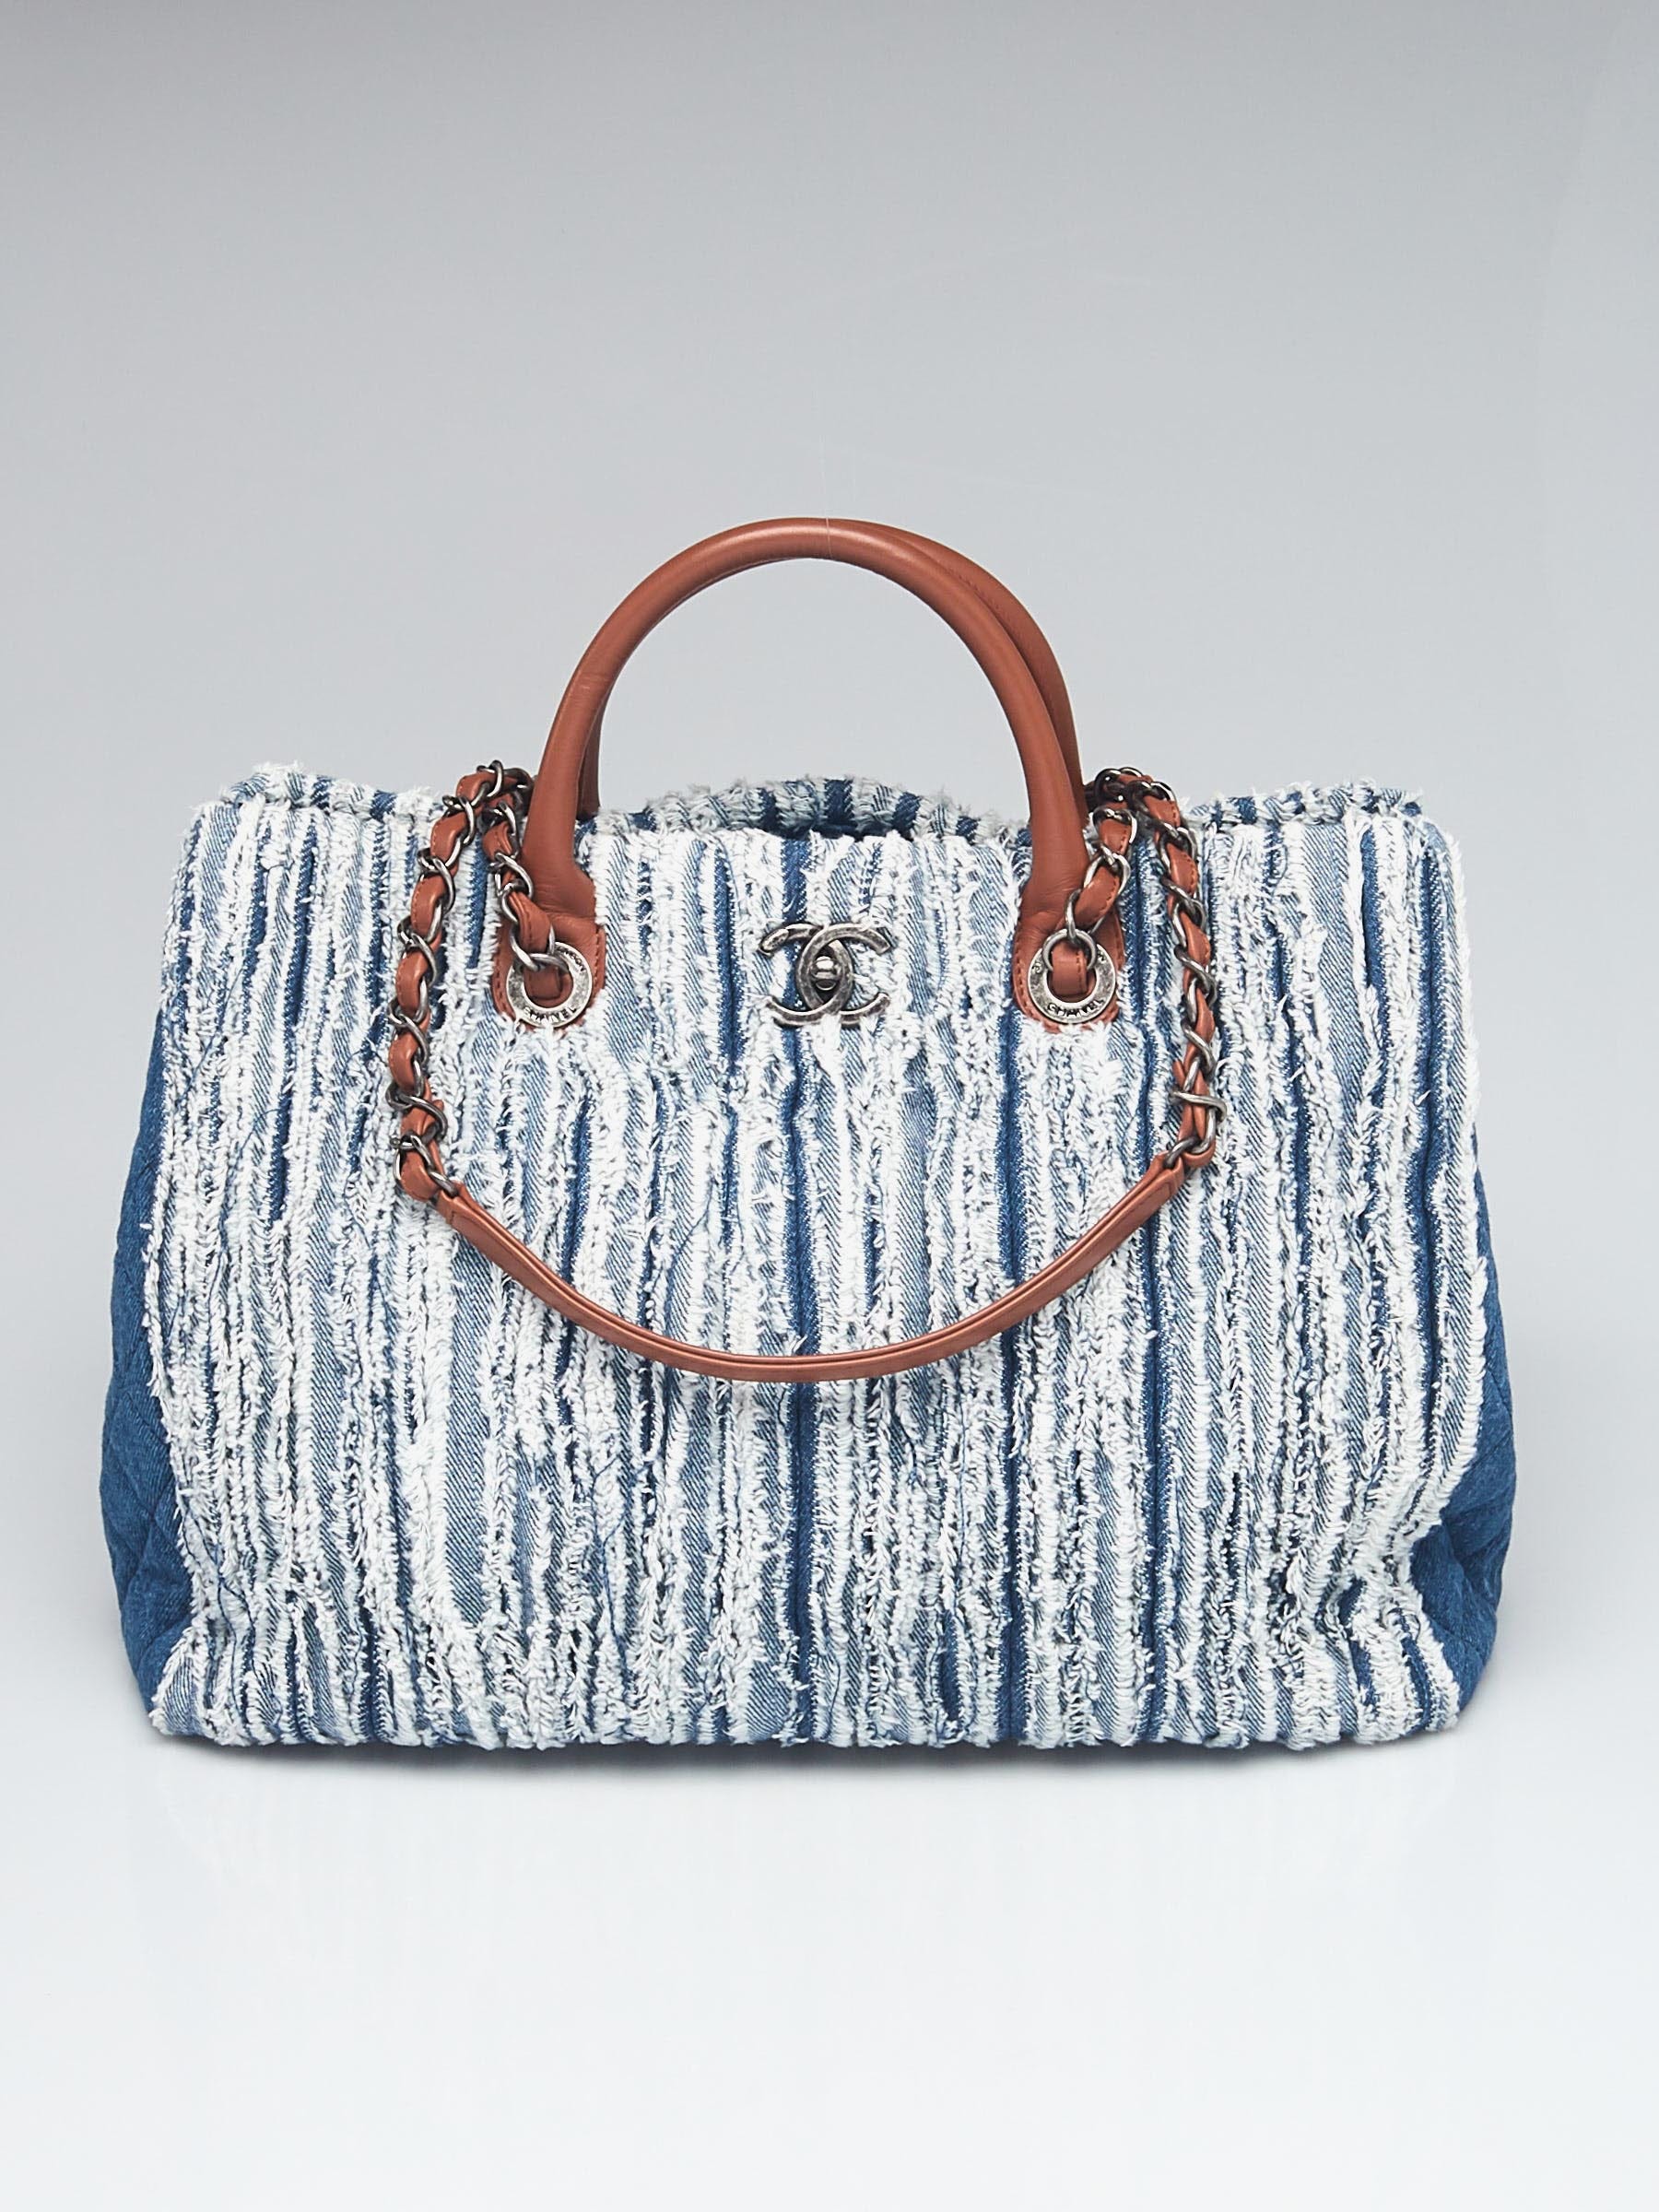 Chanel Large Deauville Shopping Bag Distressed Blue Denim Silver